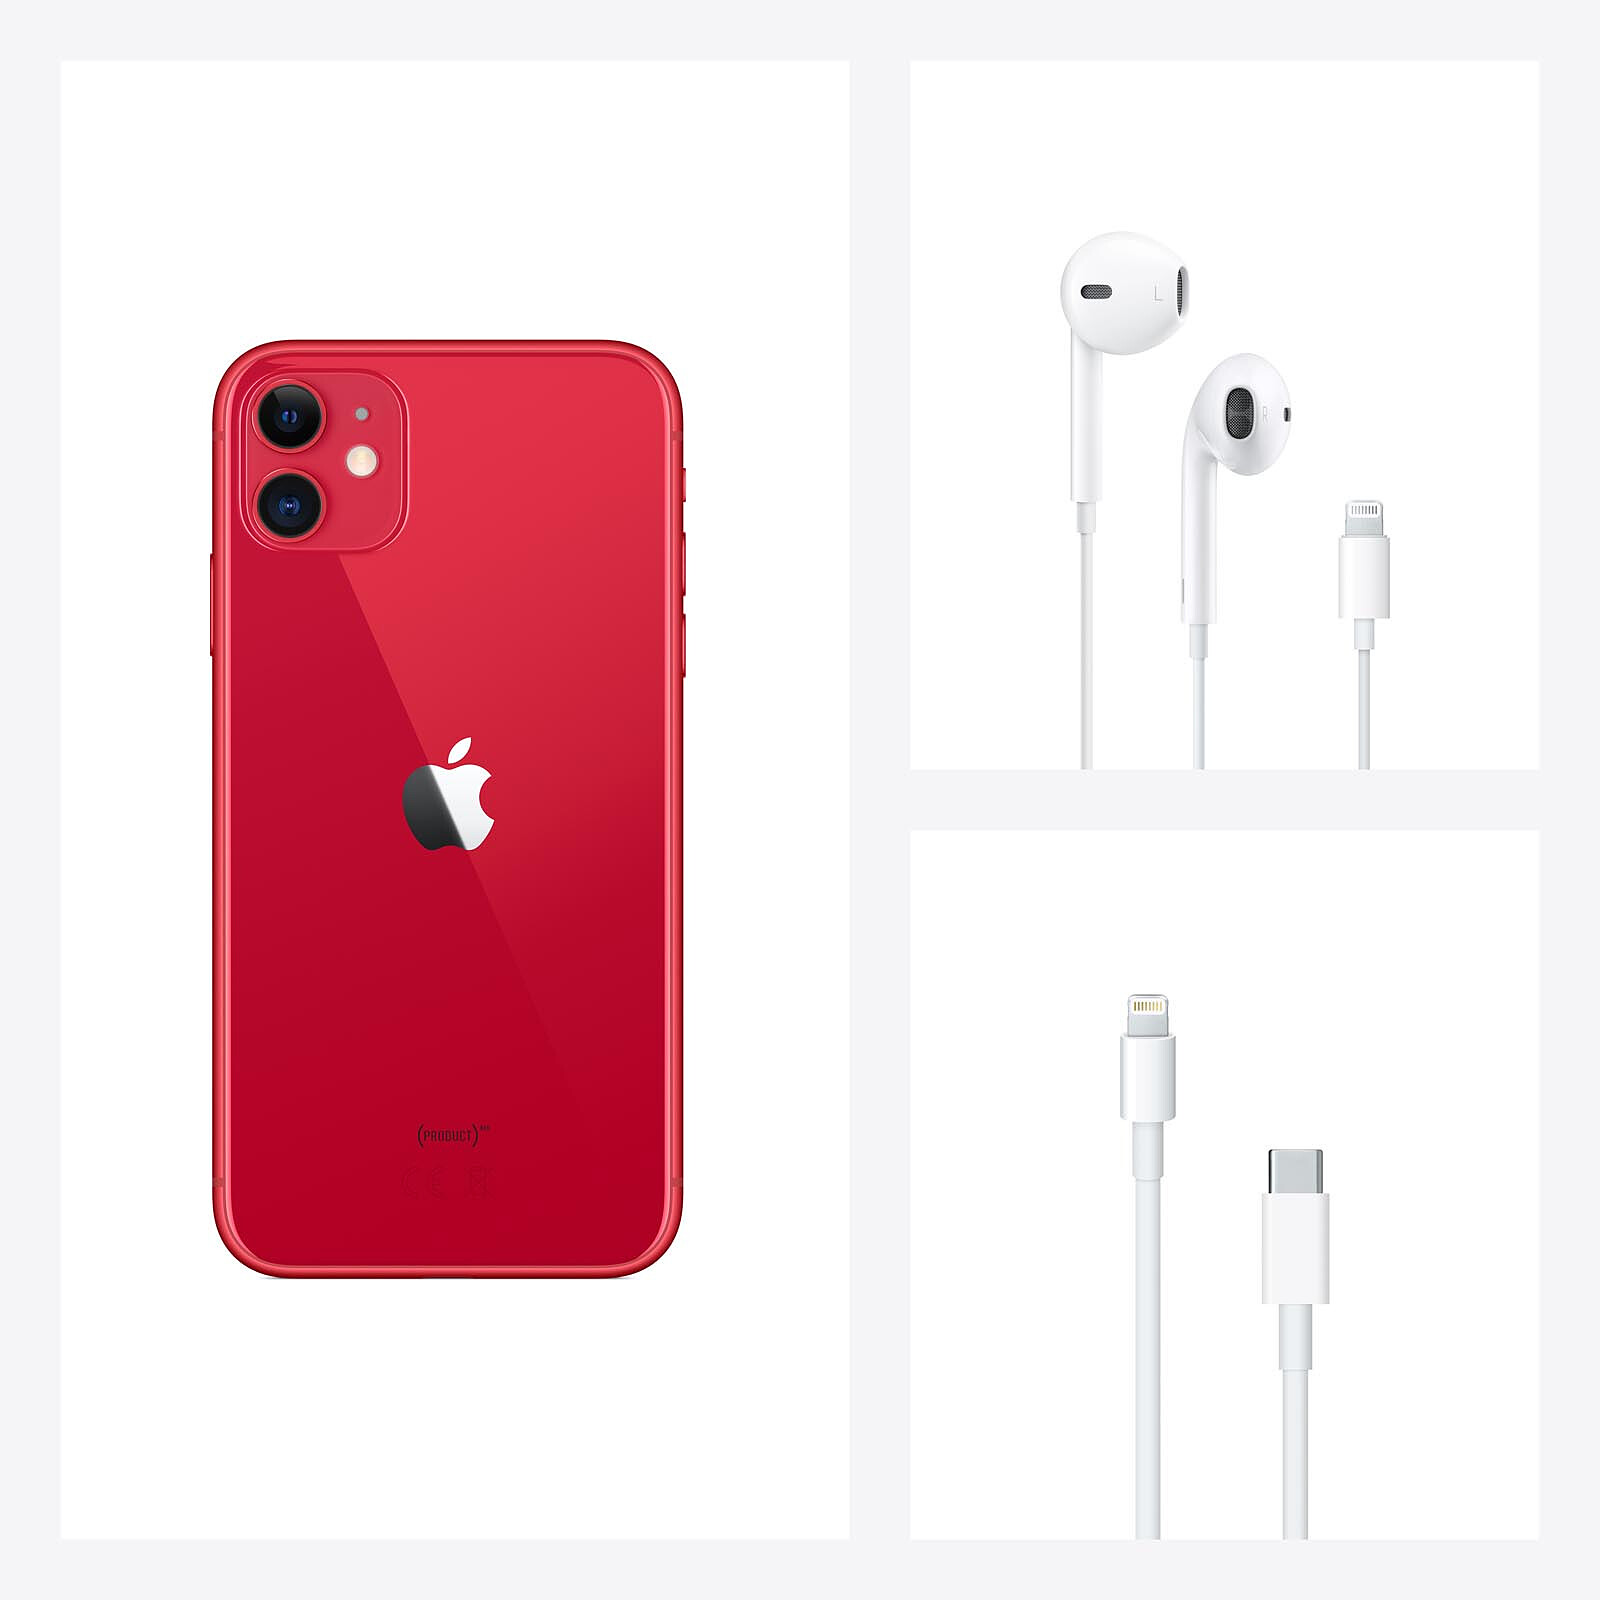 Apple iPhone 11 64GB (PRODUCT)RED - Mobile phone